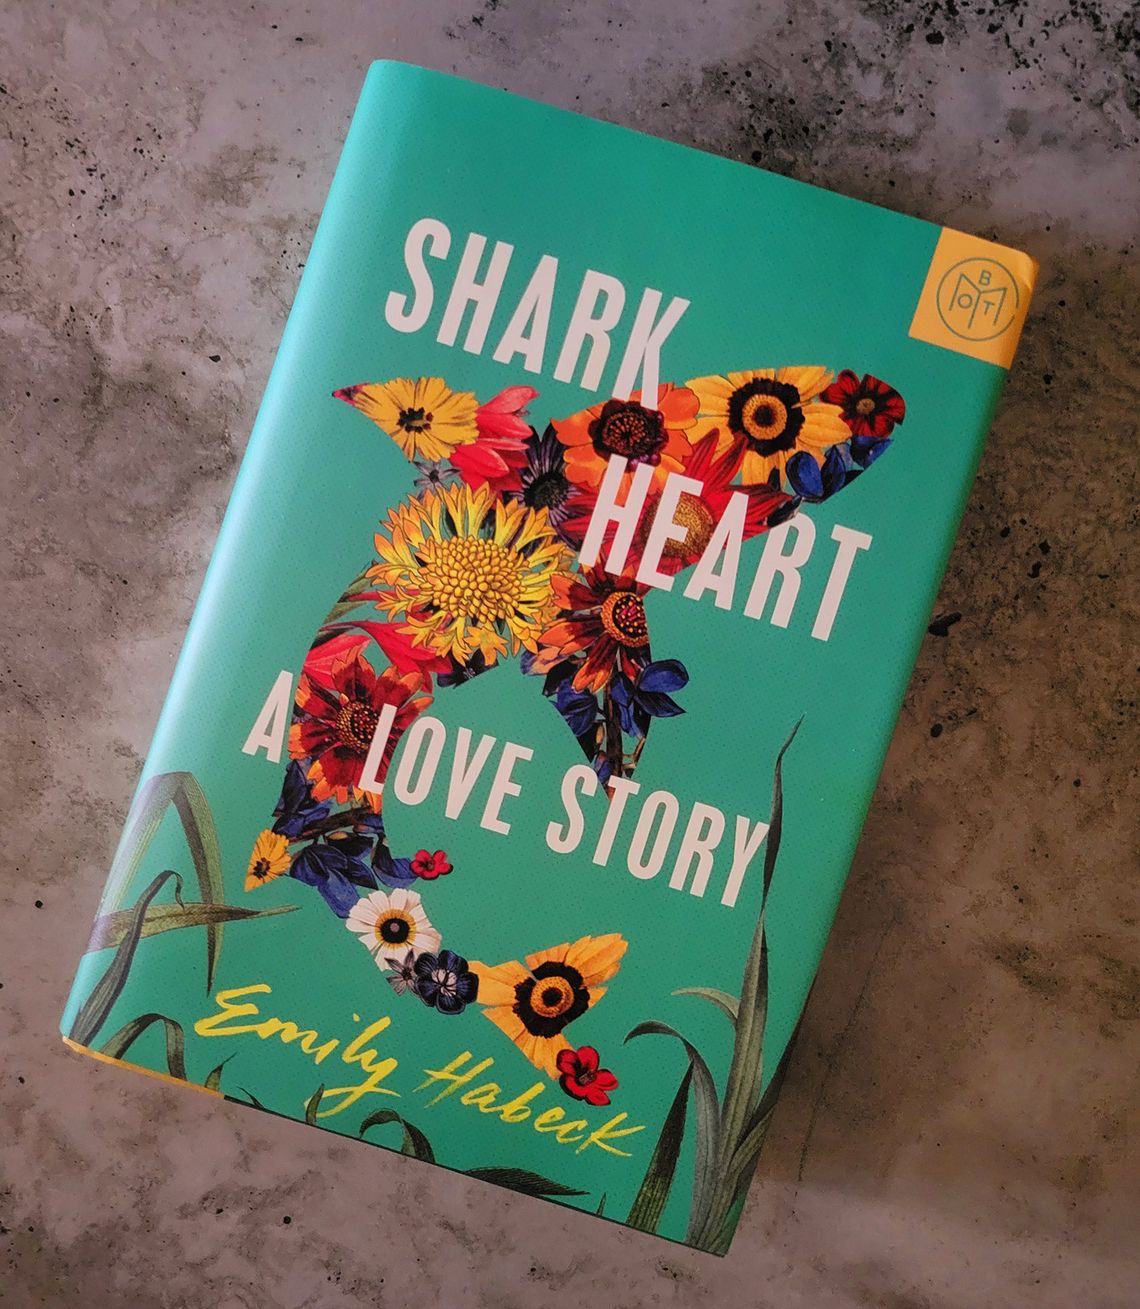 Allison's Book Report: “Shark Heart: a Love Story”  by Emily Habeck